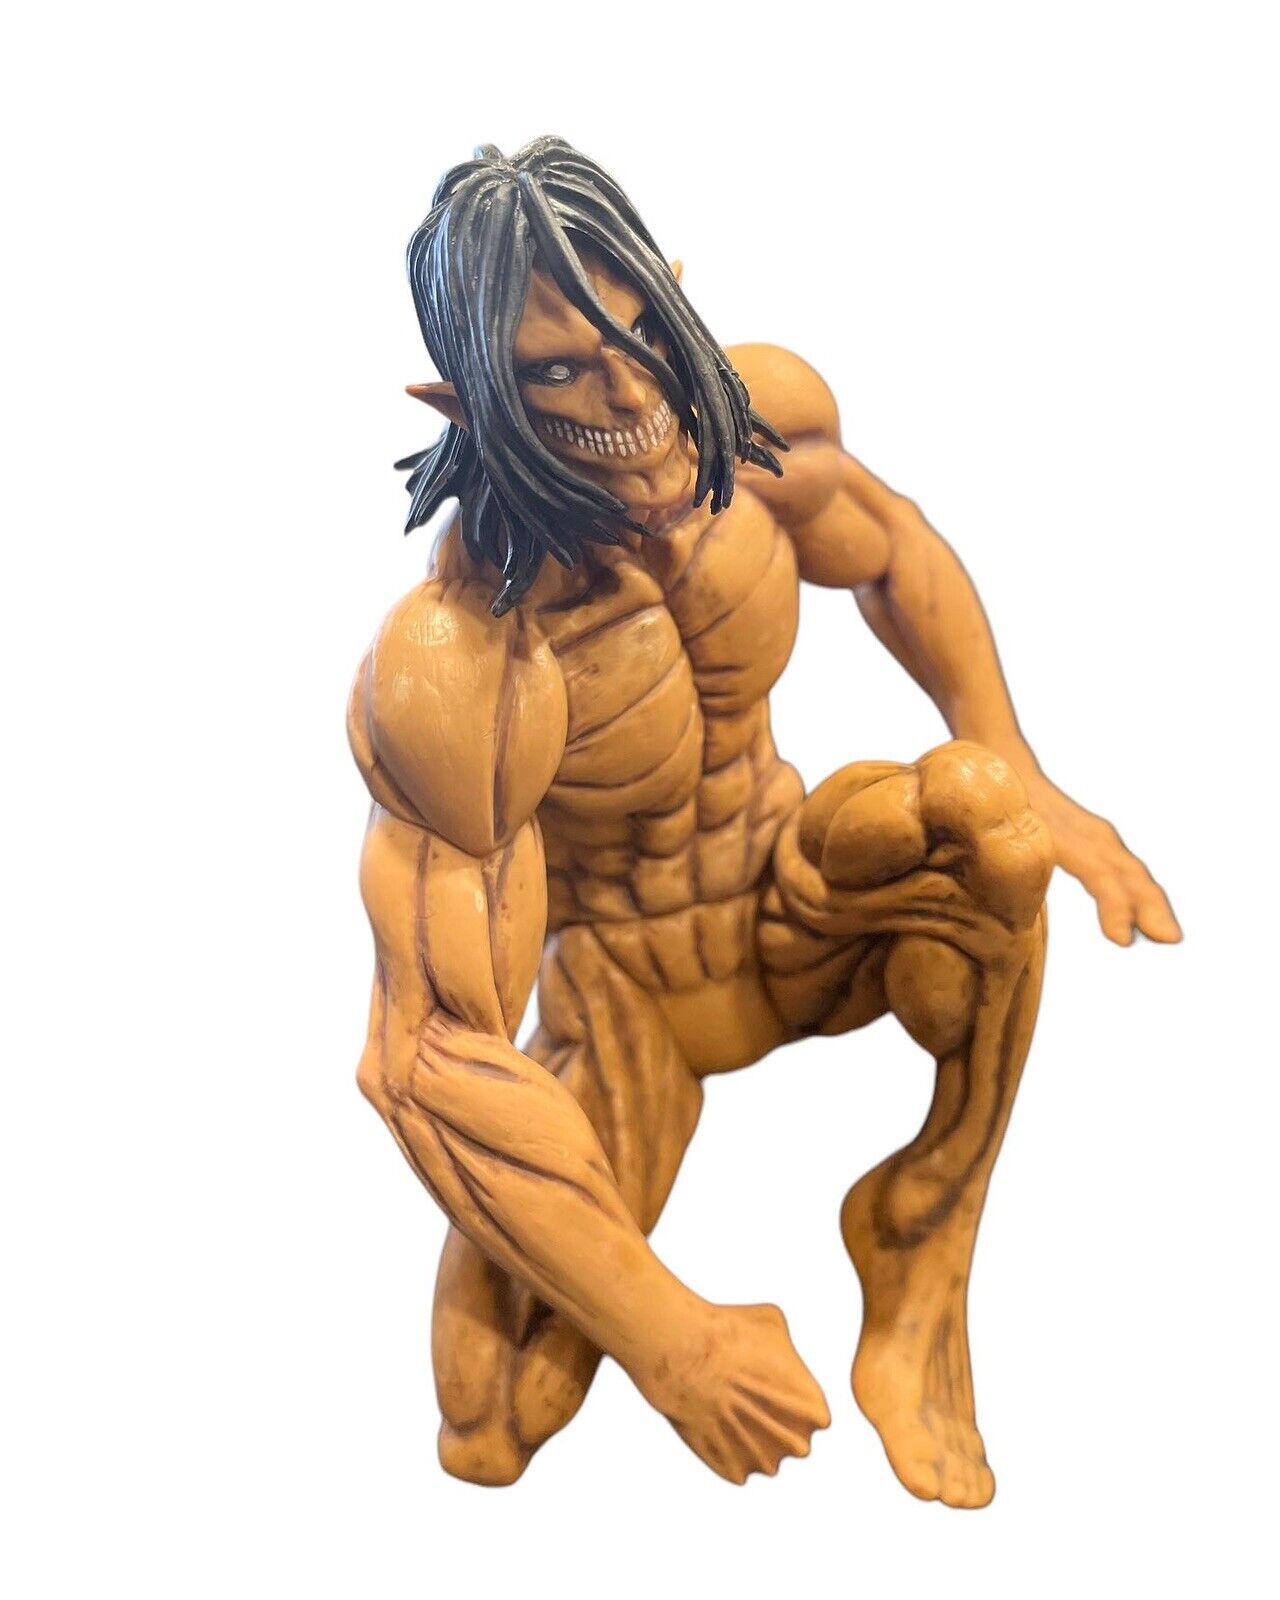 Anime Attack on Titan Figure Action PVC Statue Toy Collectible